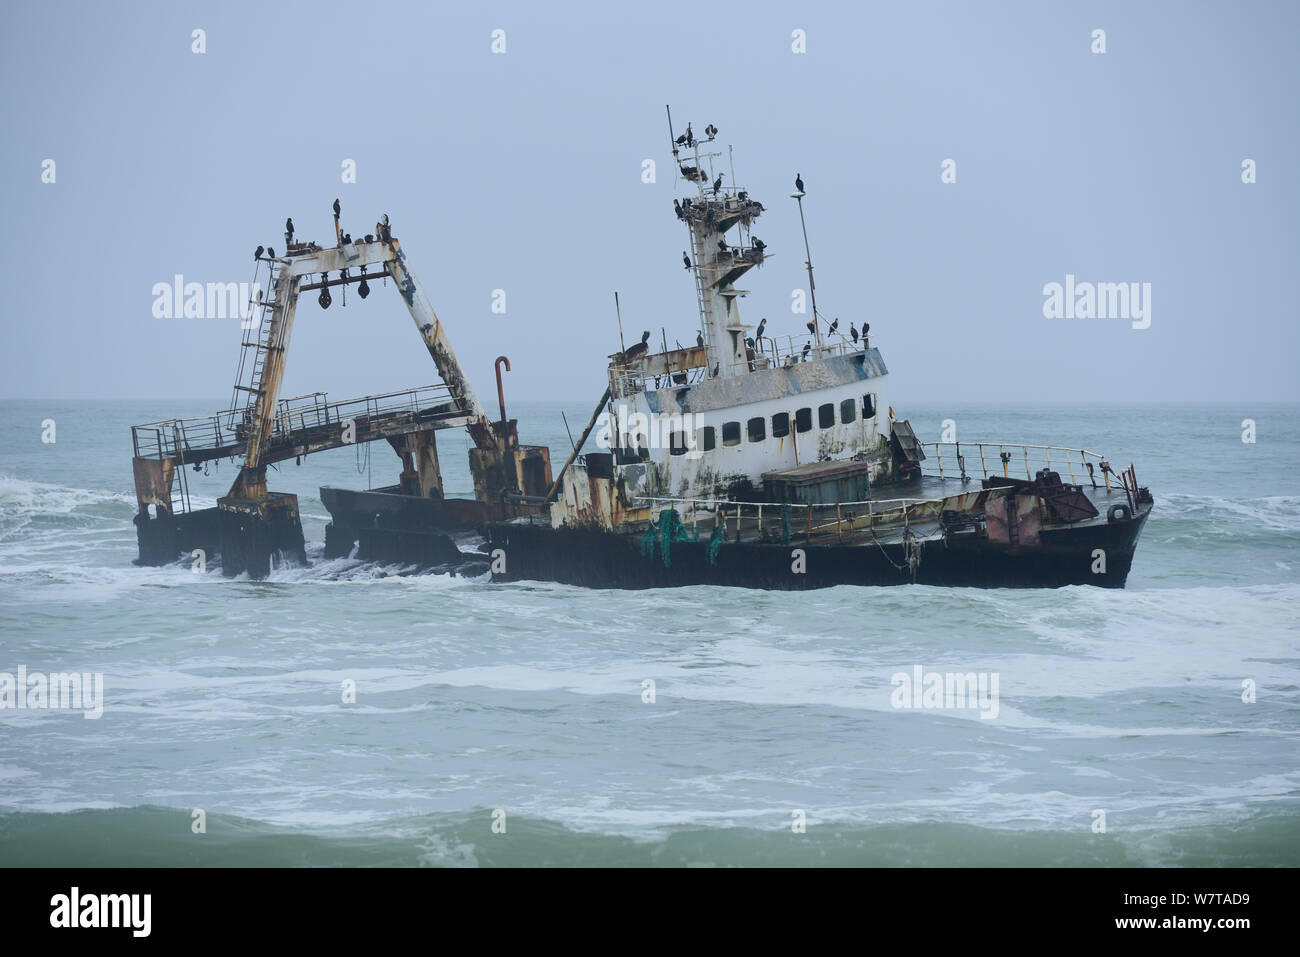 Wrecked boat aground in storm, with Cape cormorant (Phalacrocorax capensis) colony, near the coast of the Skeleton Coast National Park, Namibia, September 2013. Stock Photo